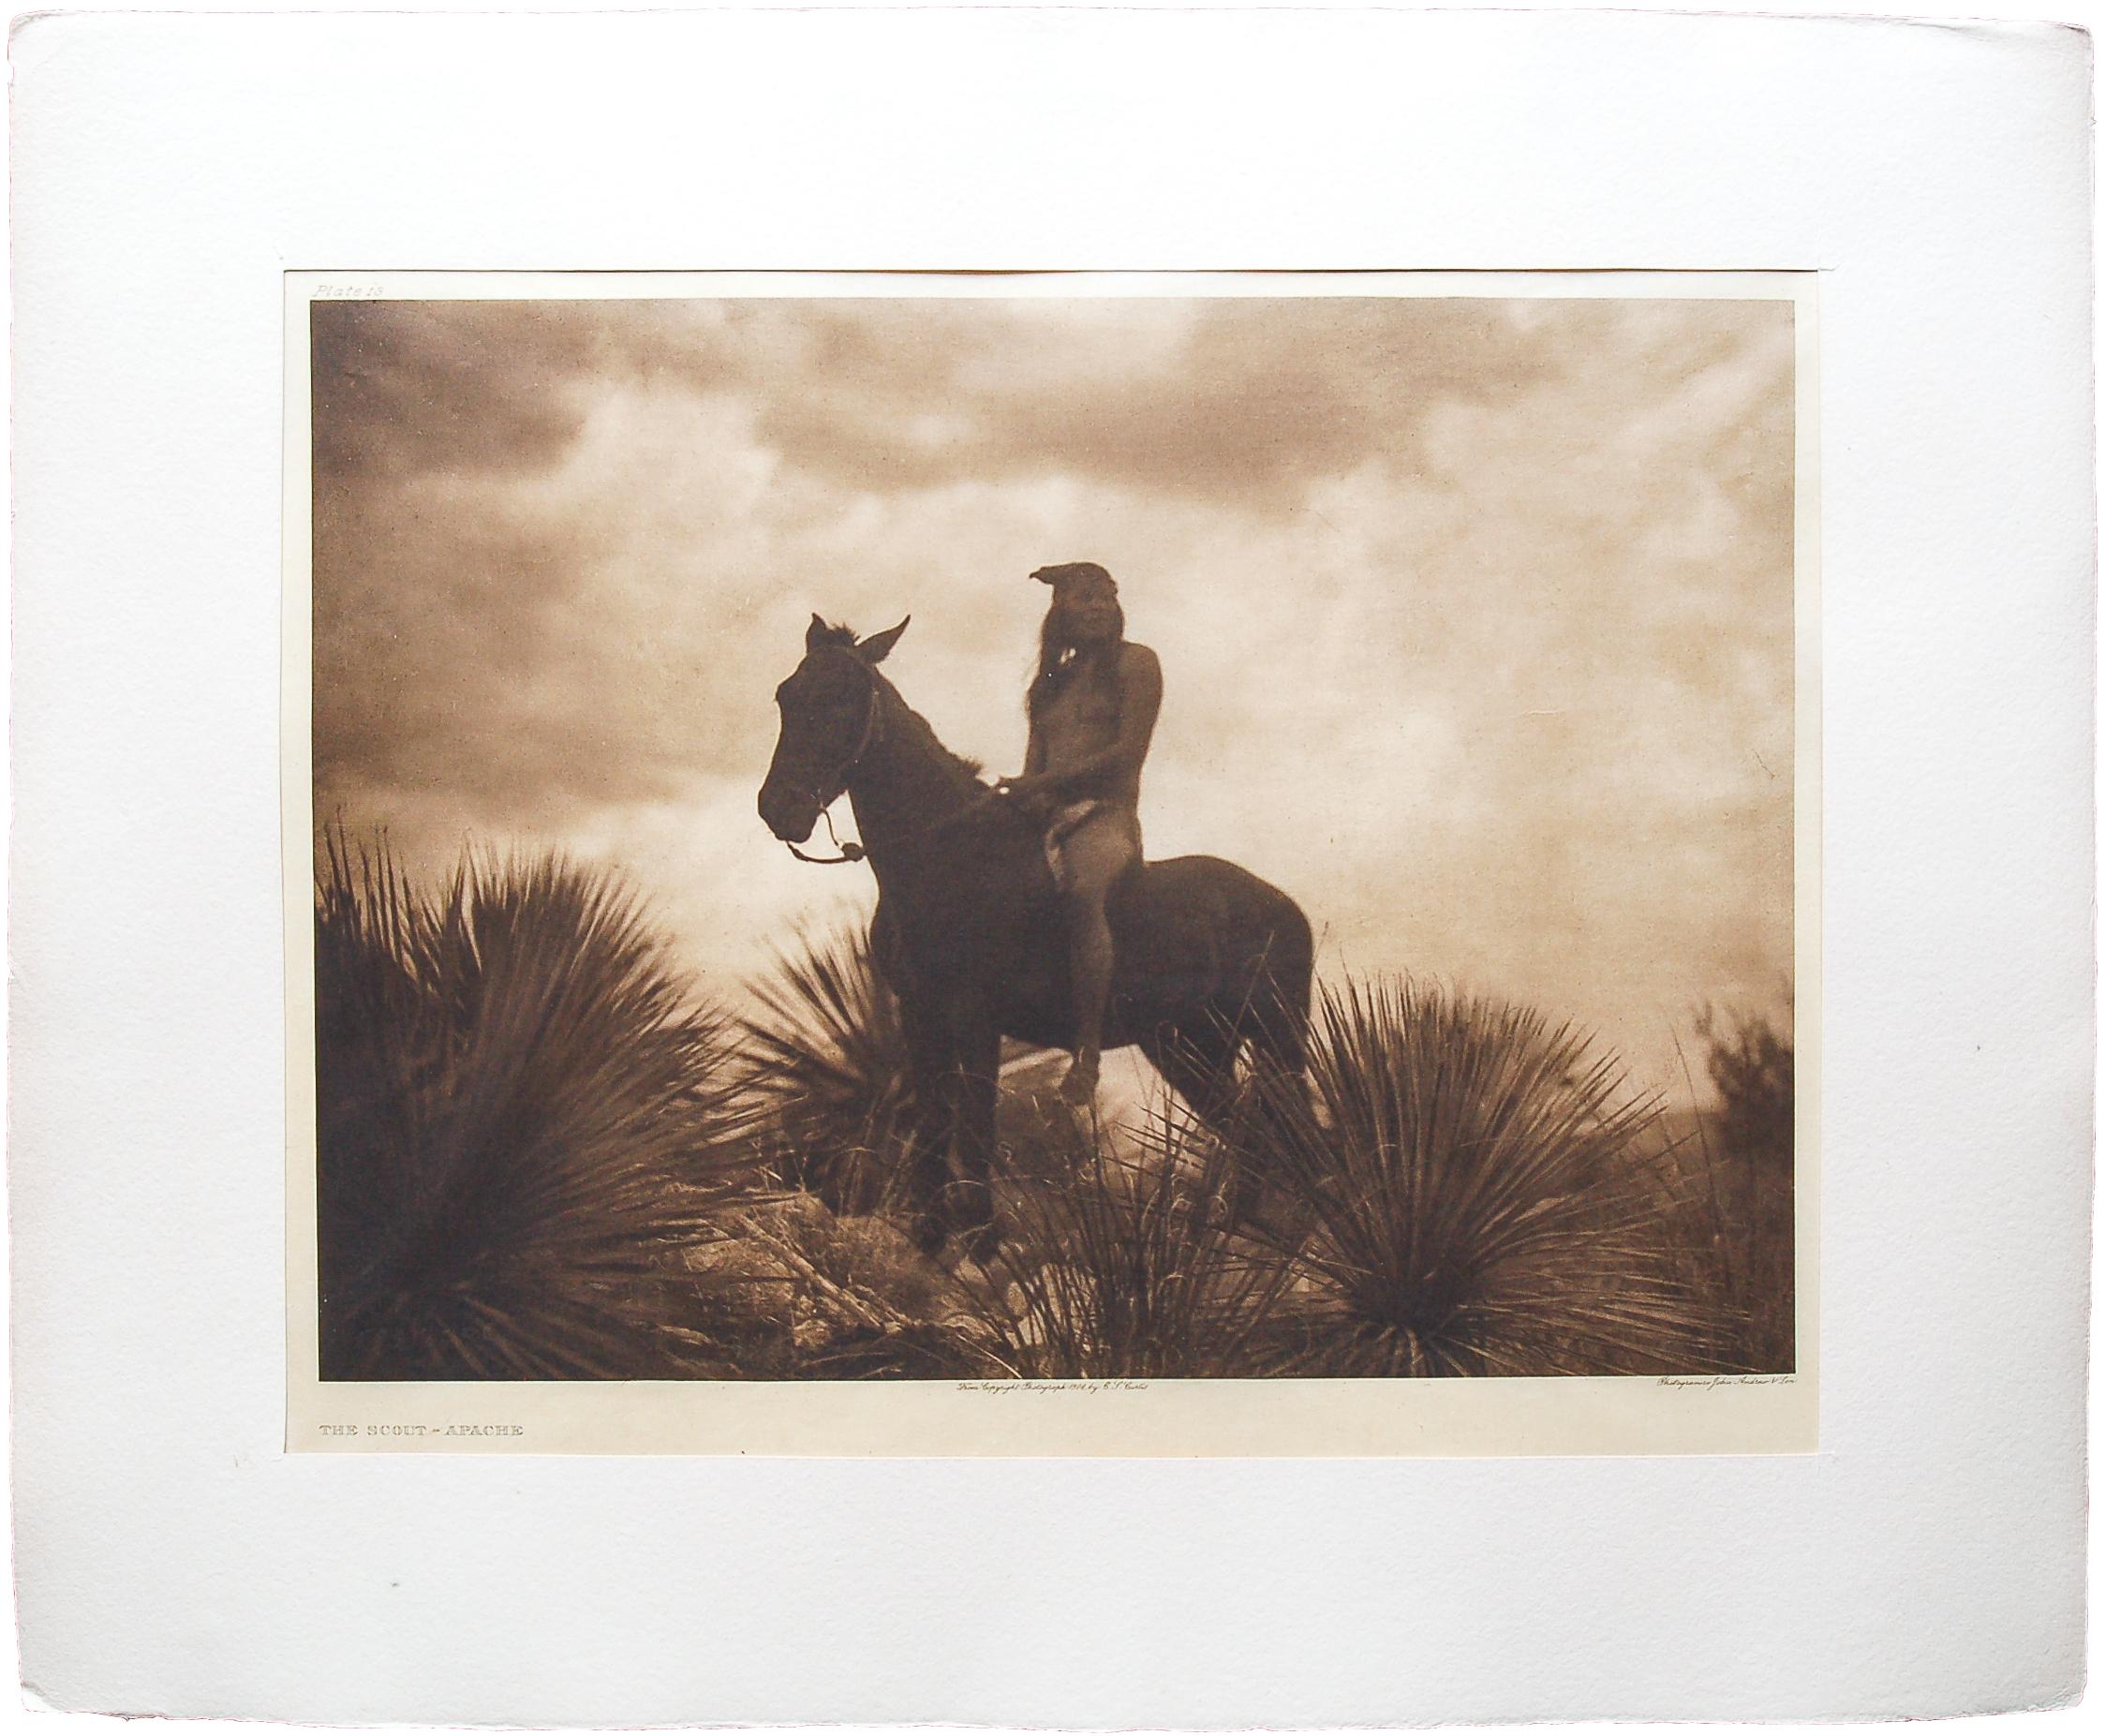 The Scout - Apache - Photograph by Edward S. Curtis